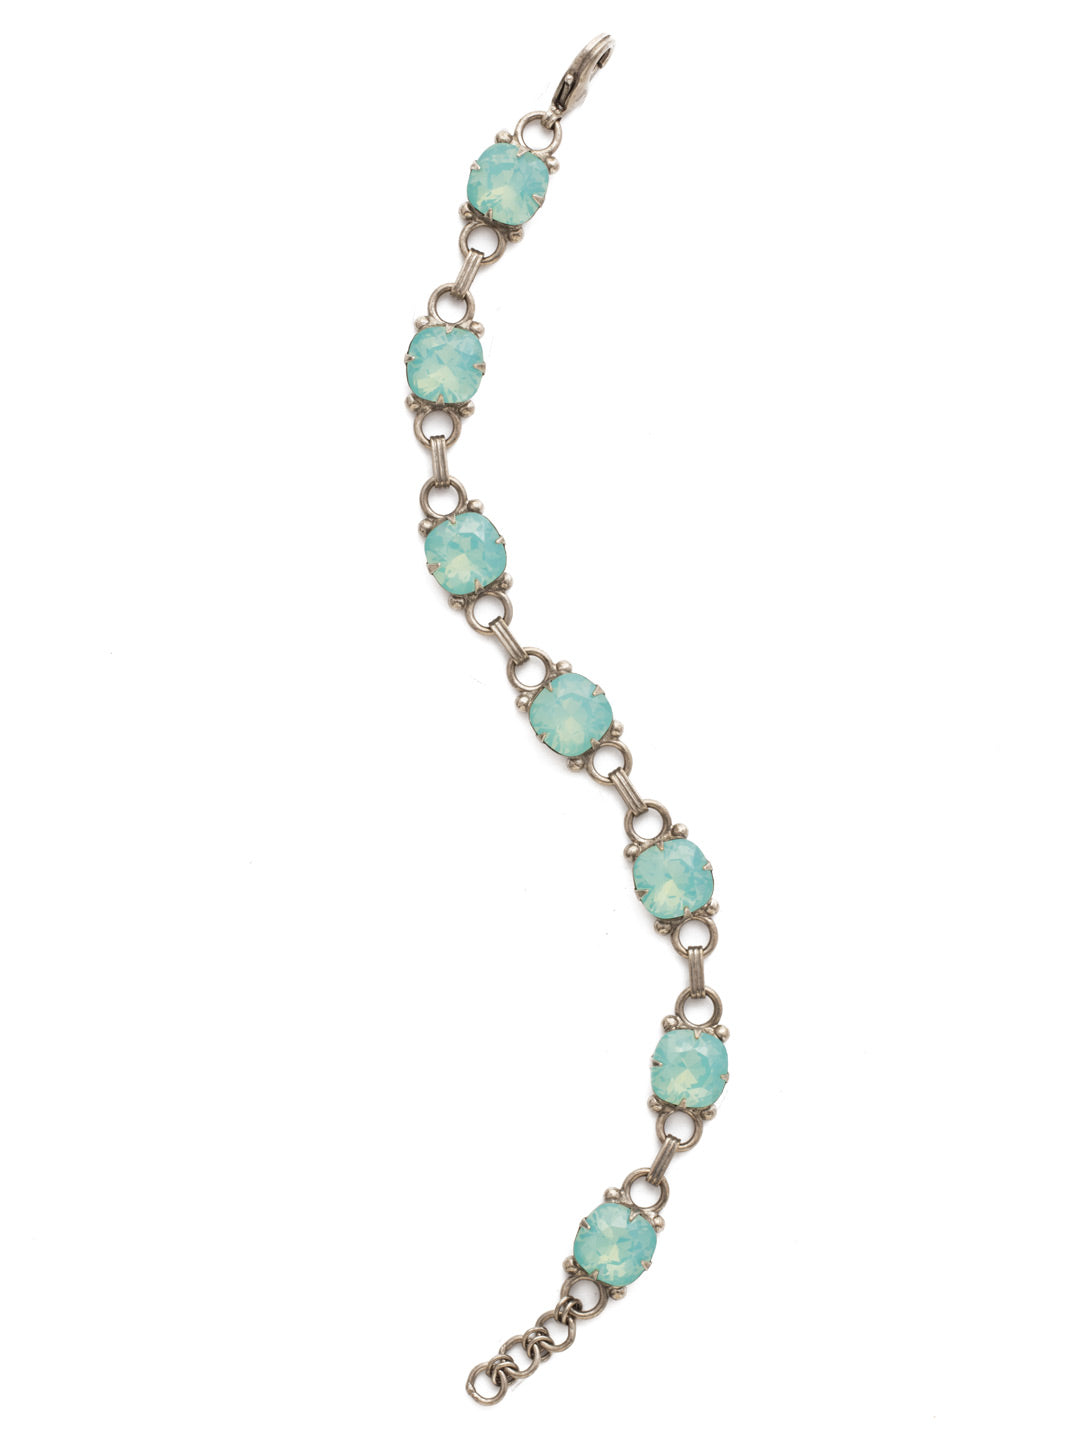 Eyelet Line Tennis Bracelet - BDN16ASPAC - A classic design that can be added to any look for just enough sparkle. From Sorrelli's Pacific Opal collection in our Antique Silver-tone finish.